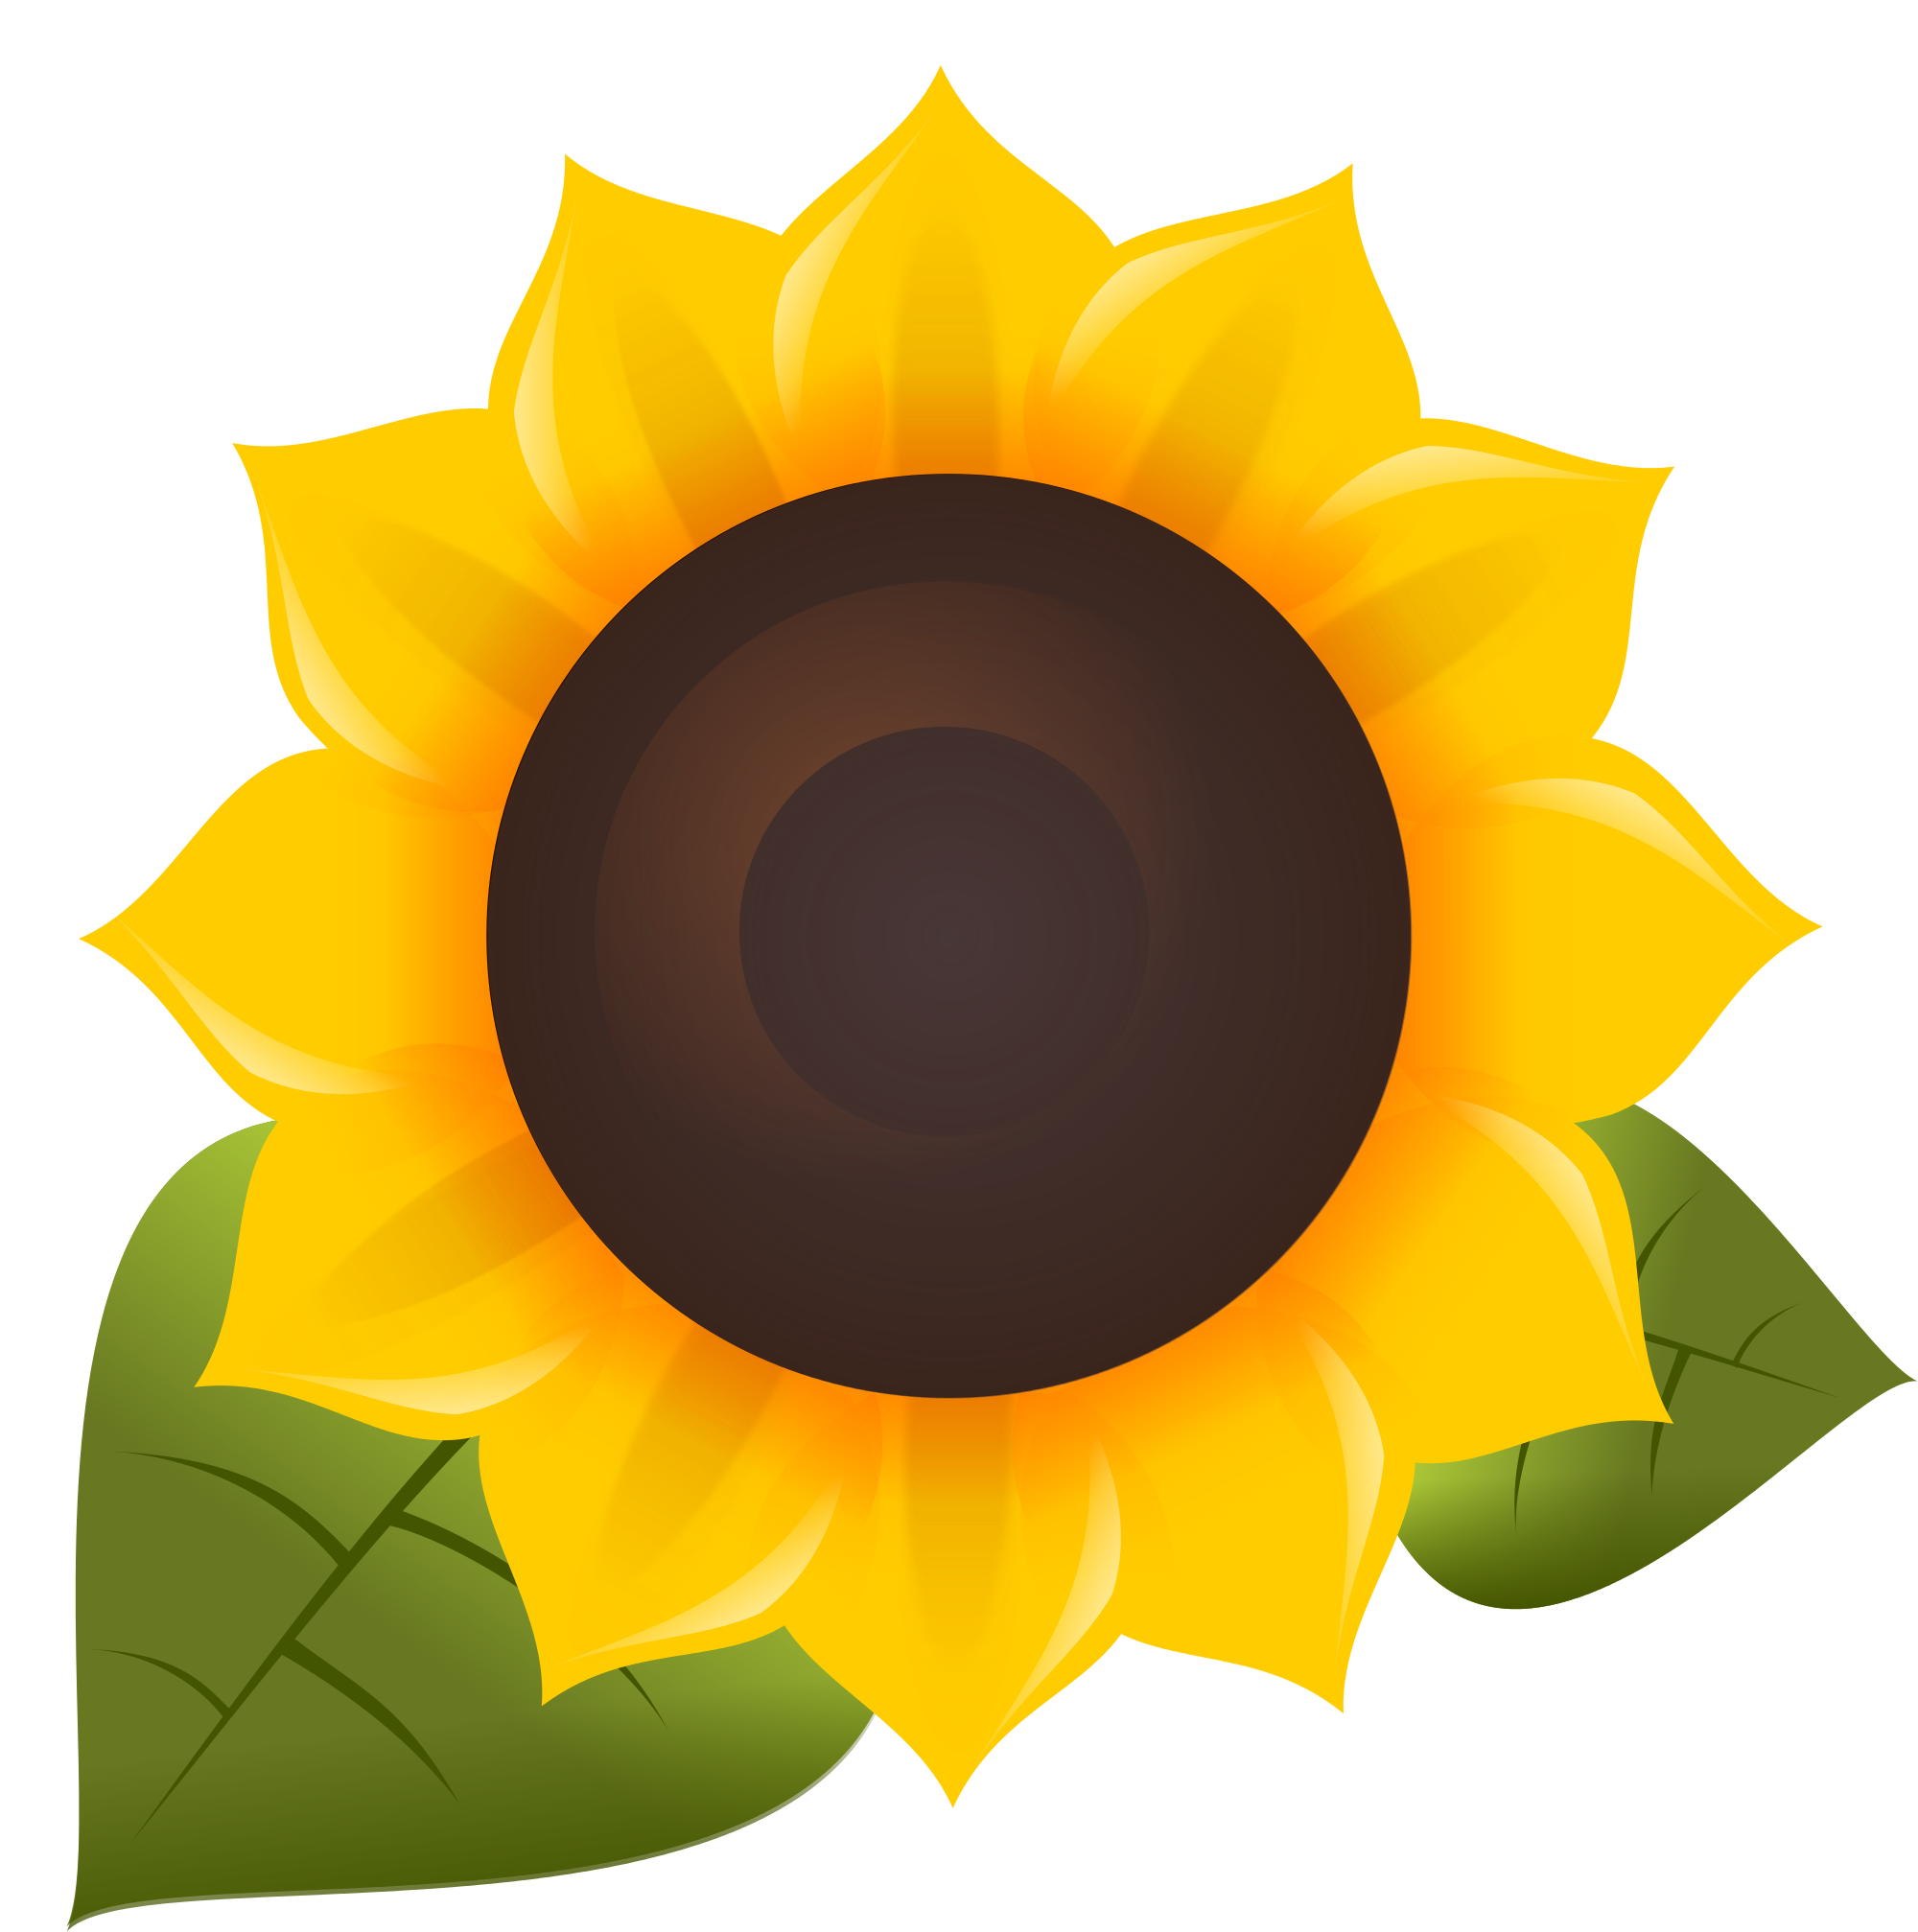 Oil Common Sunflower Software Free Download PNG HQ PNG Image